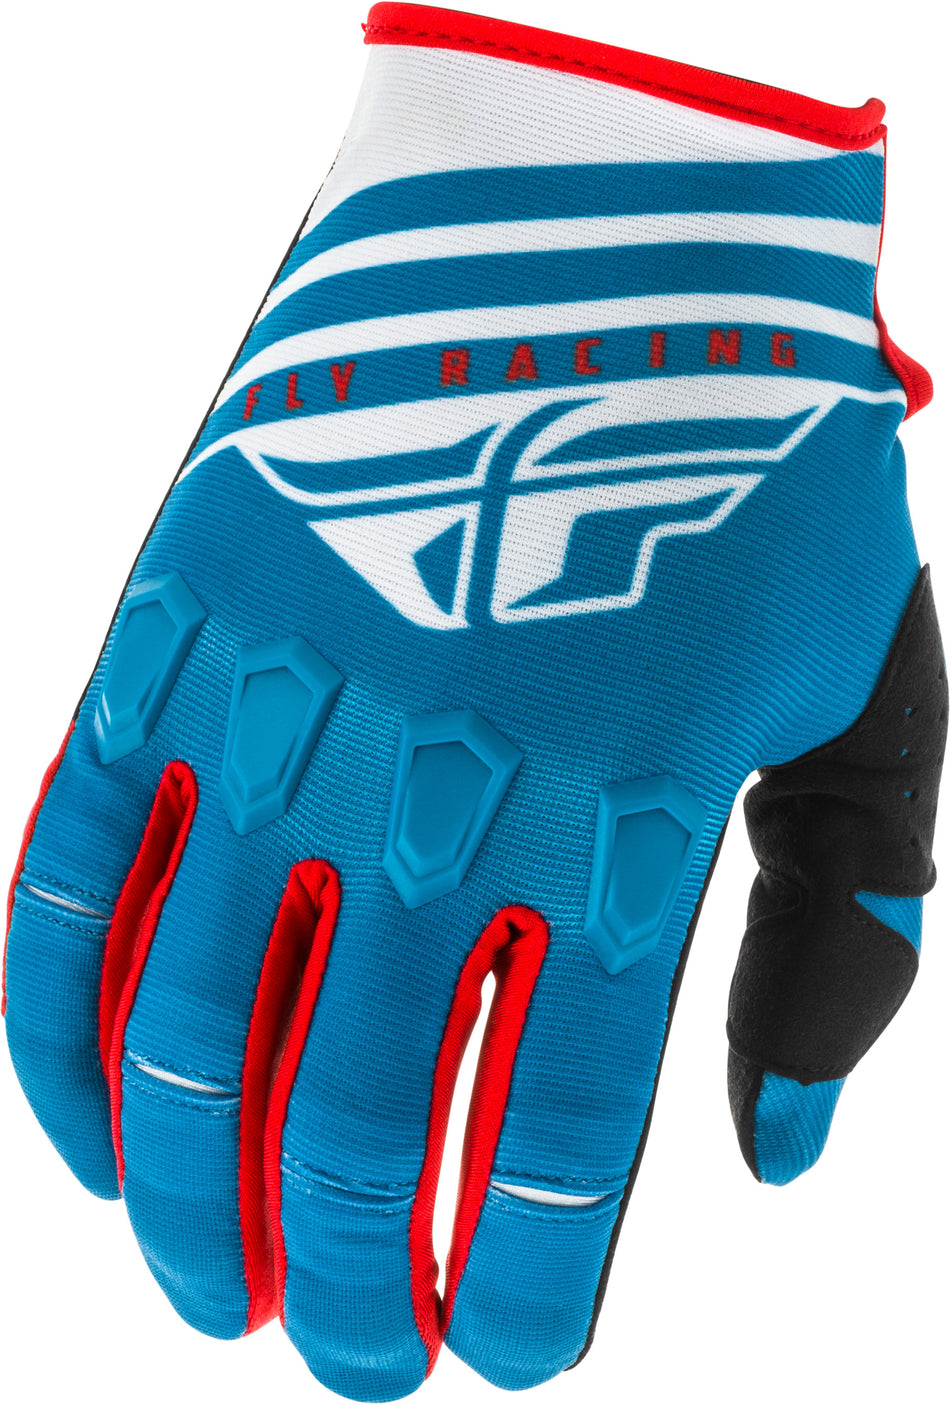 FLY RACING Kinetic K220 Gloves Blue/White/Red Sz 05 373-51105